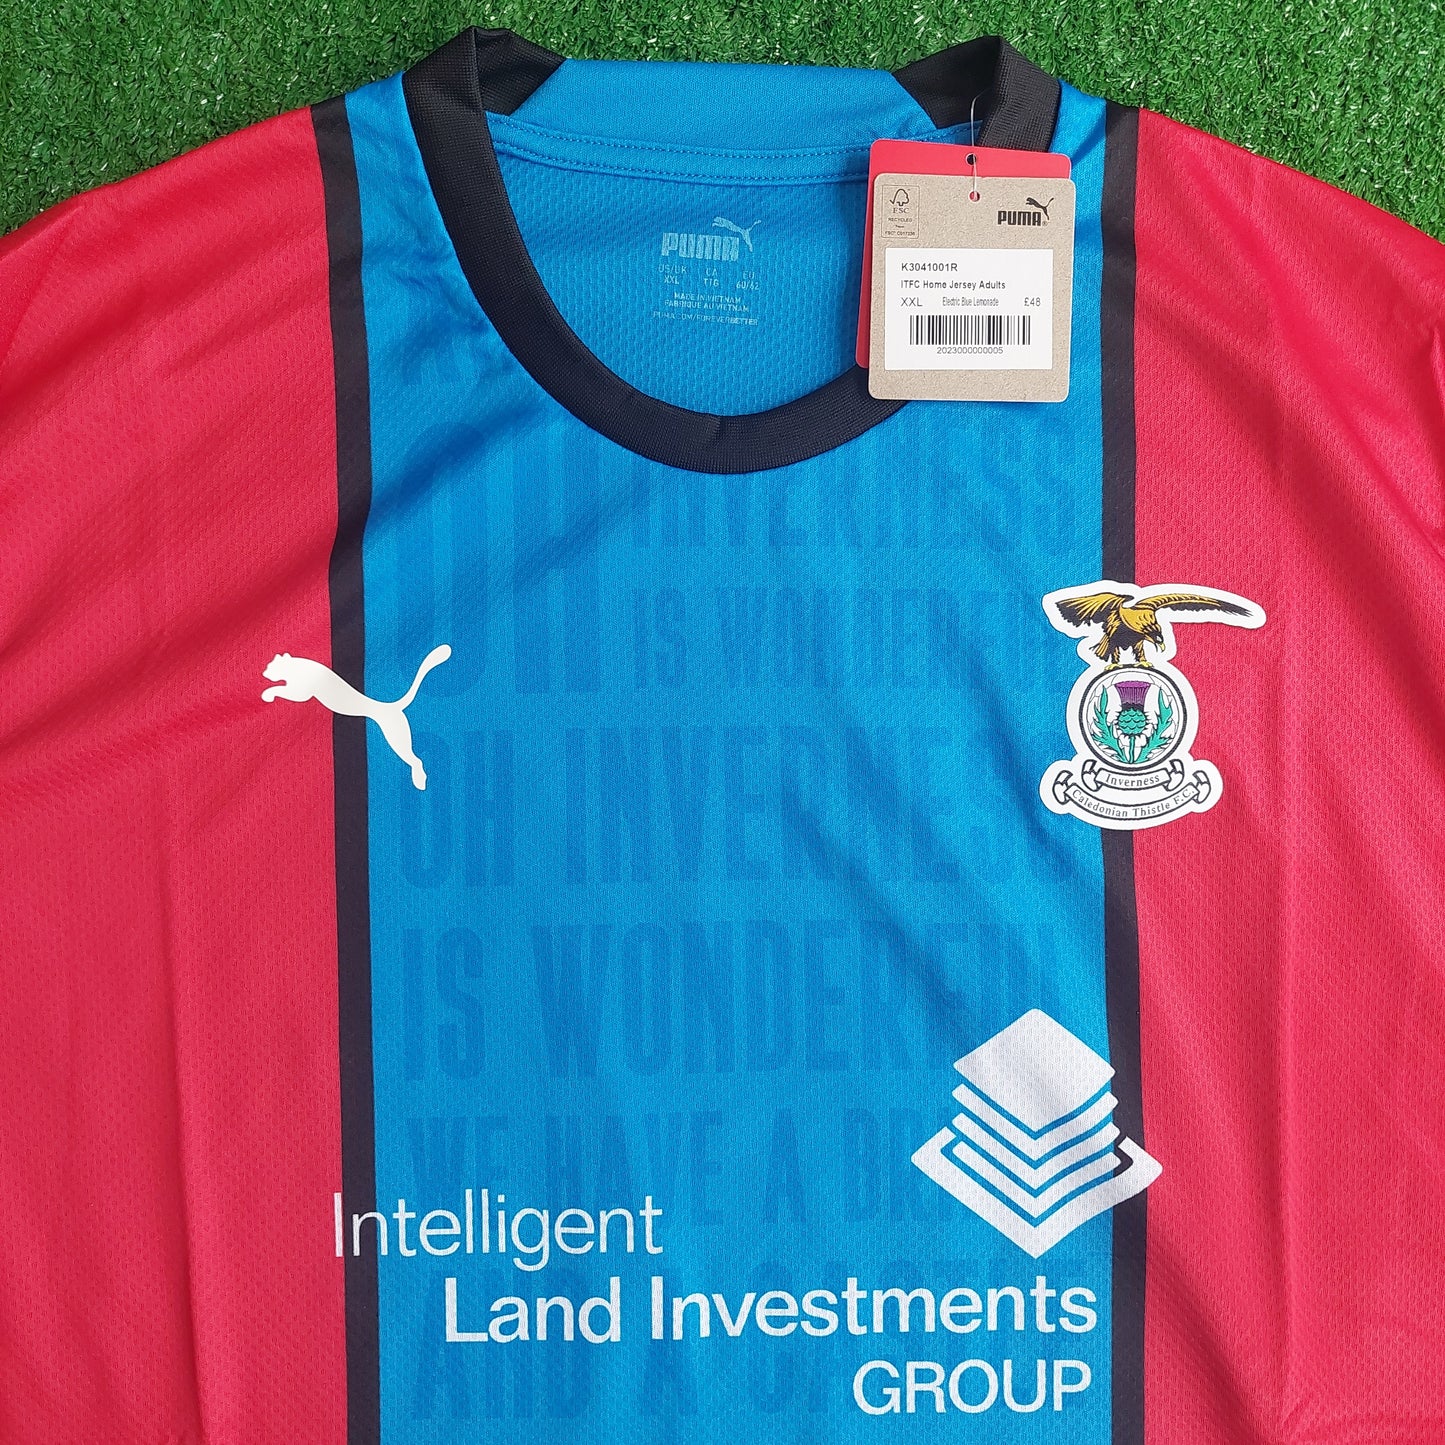 Inverness CT 2022/23 Home Shirt (BNWT) - Size 3XL